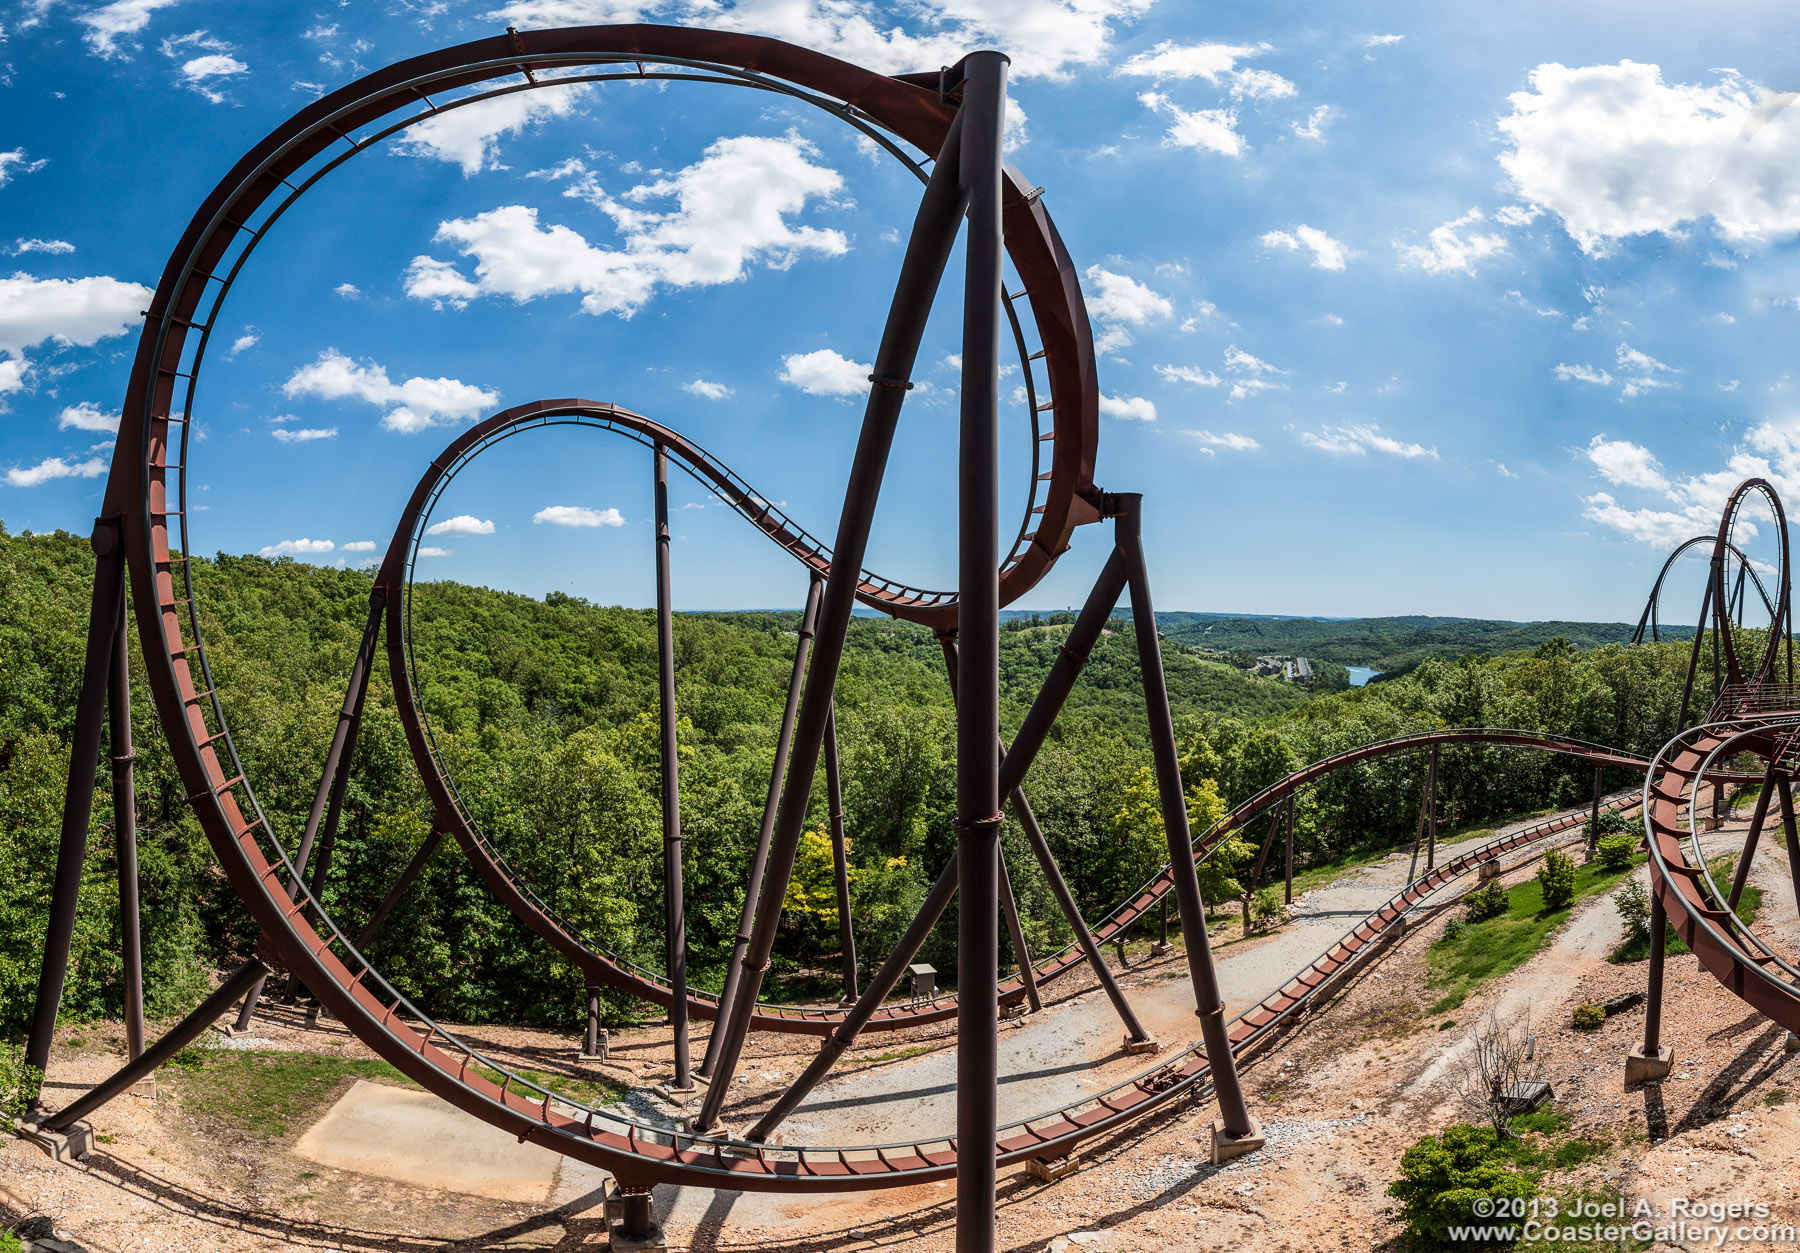 Panorama of a corbra roll loop on a B&M roller coaster at Silver Dollar City.